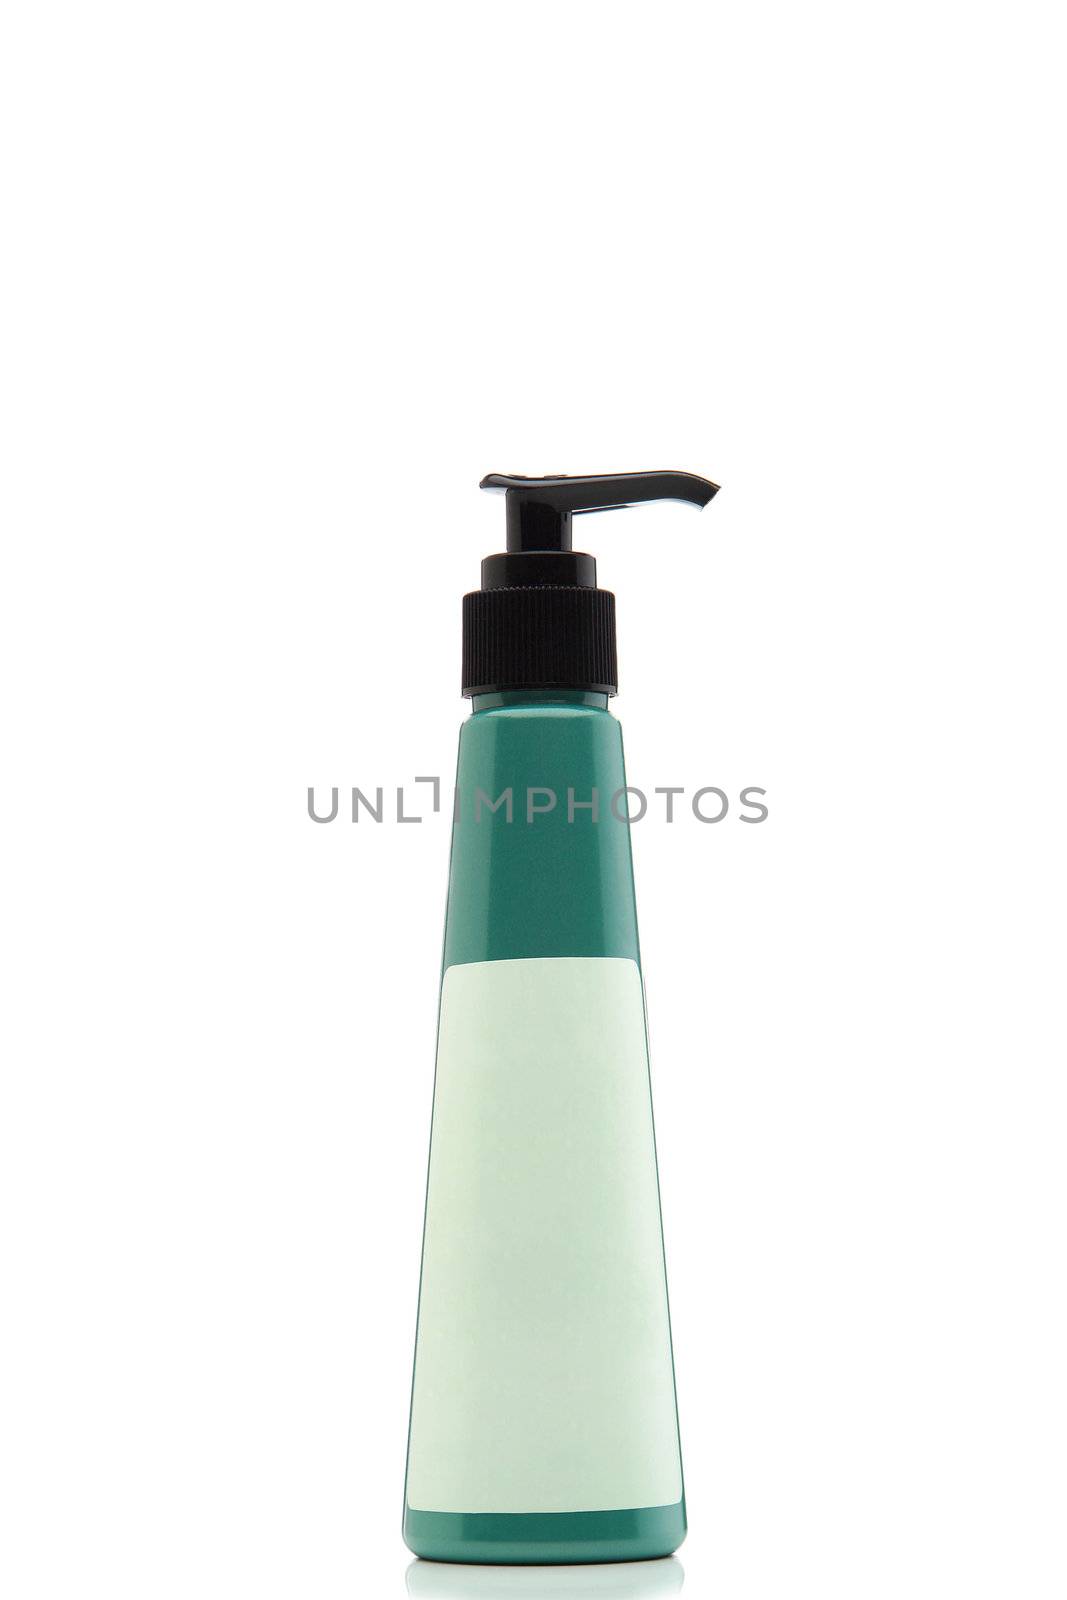 liquid soap container isolated by ozaiachin